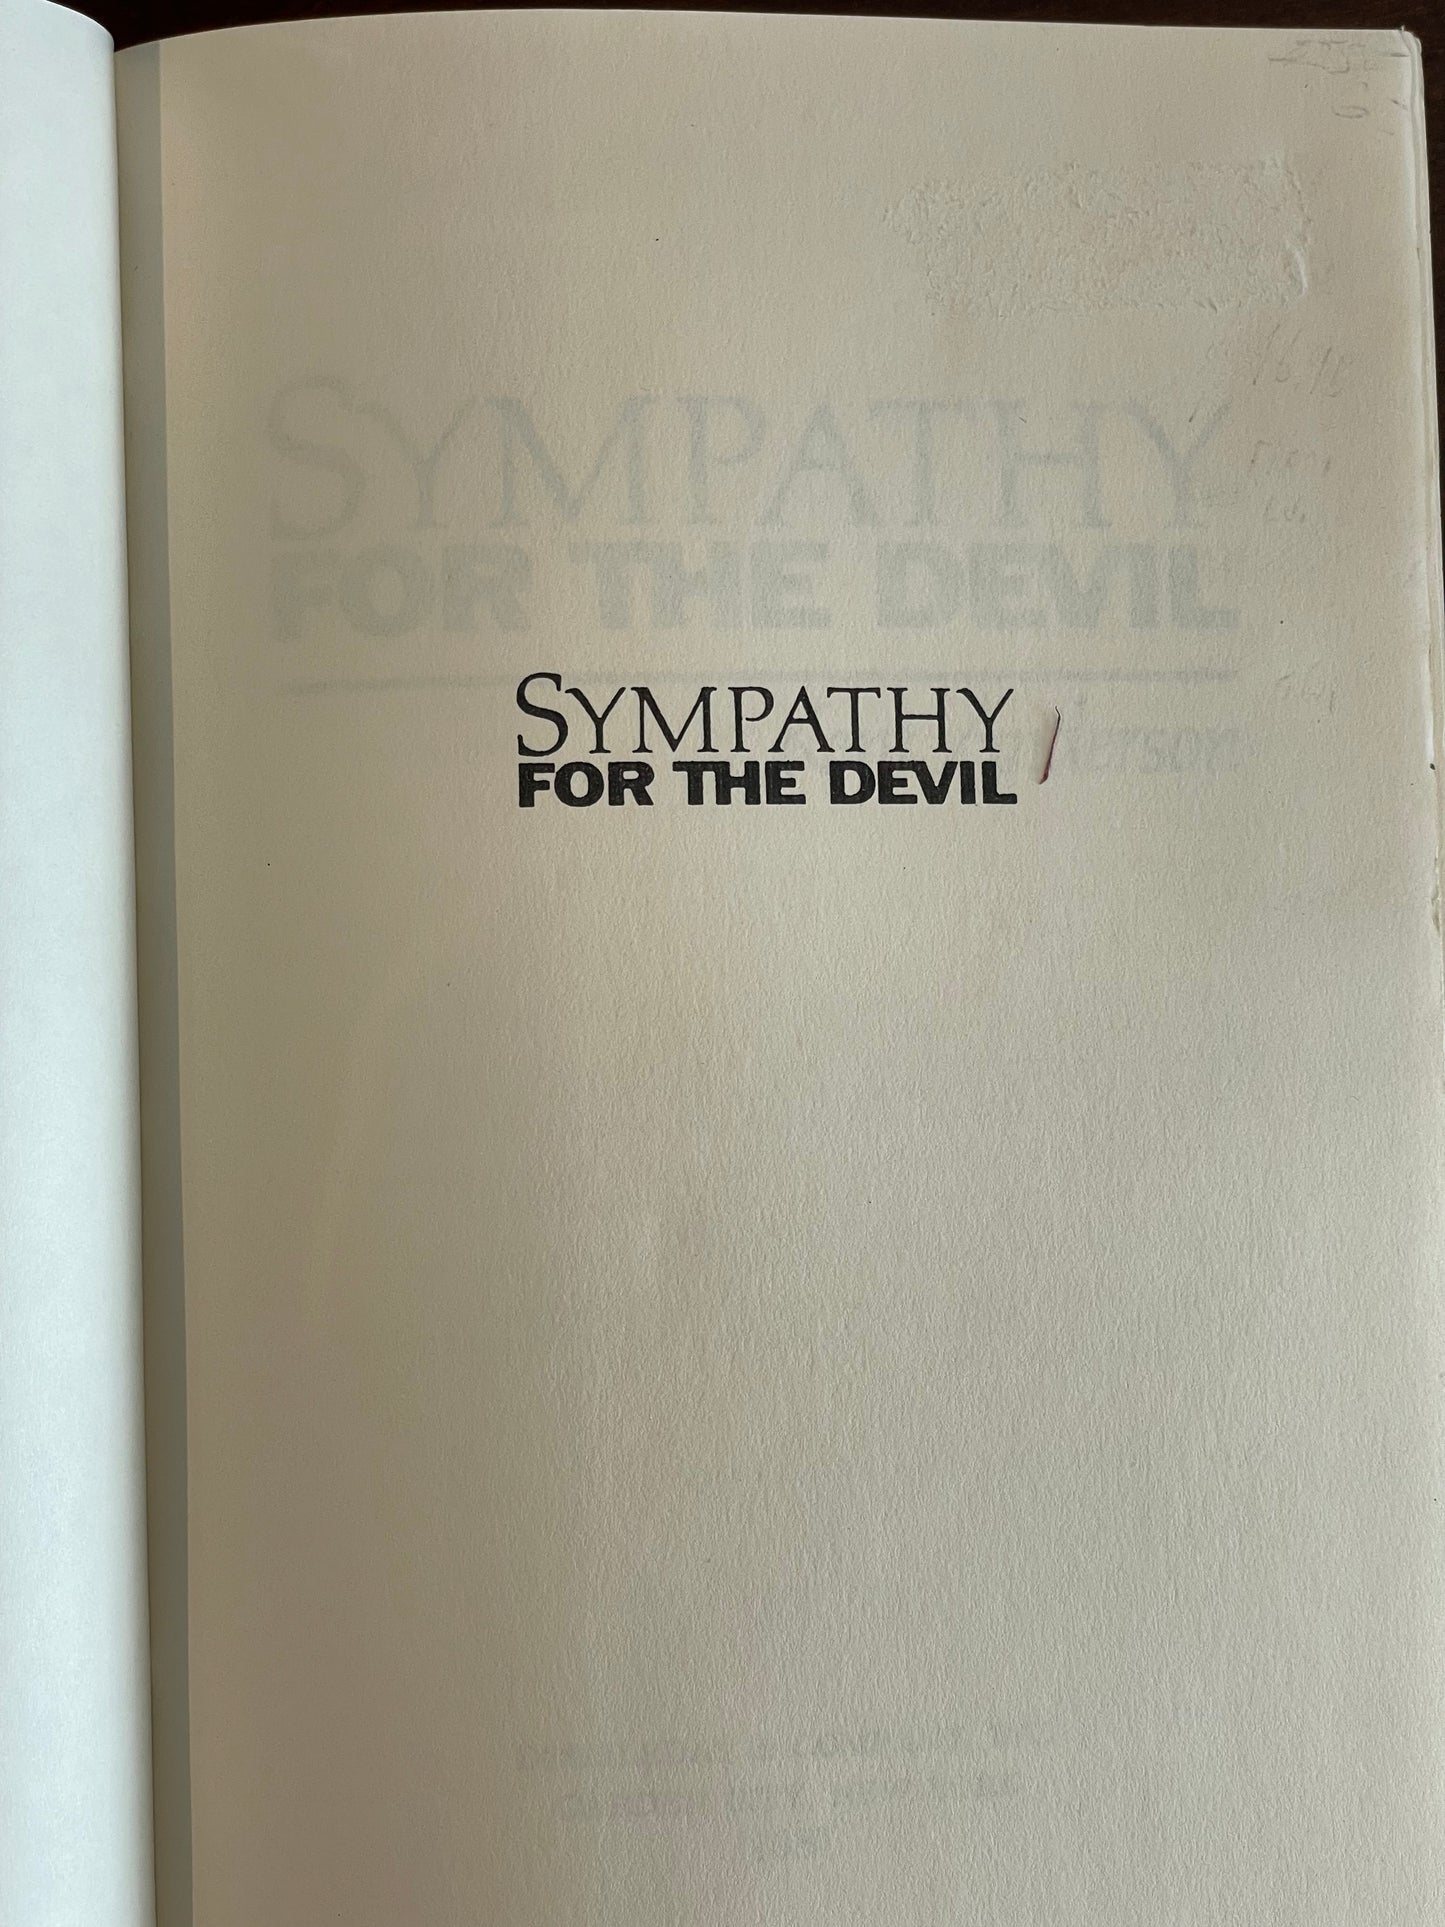 Sympathy For The Devil by Kent Anderson (first edition)